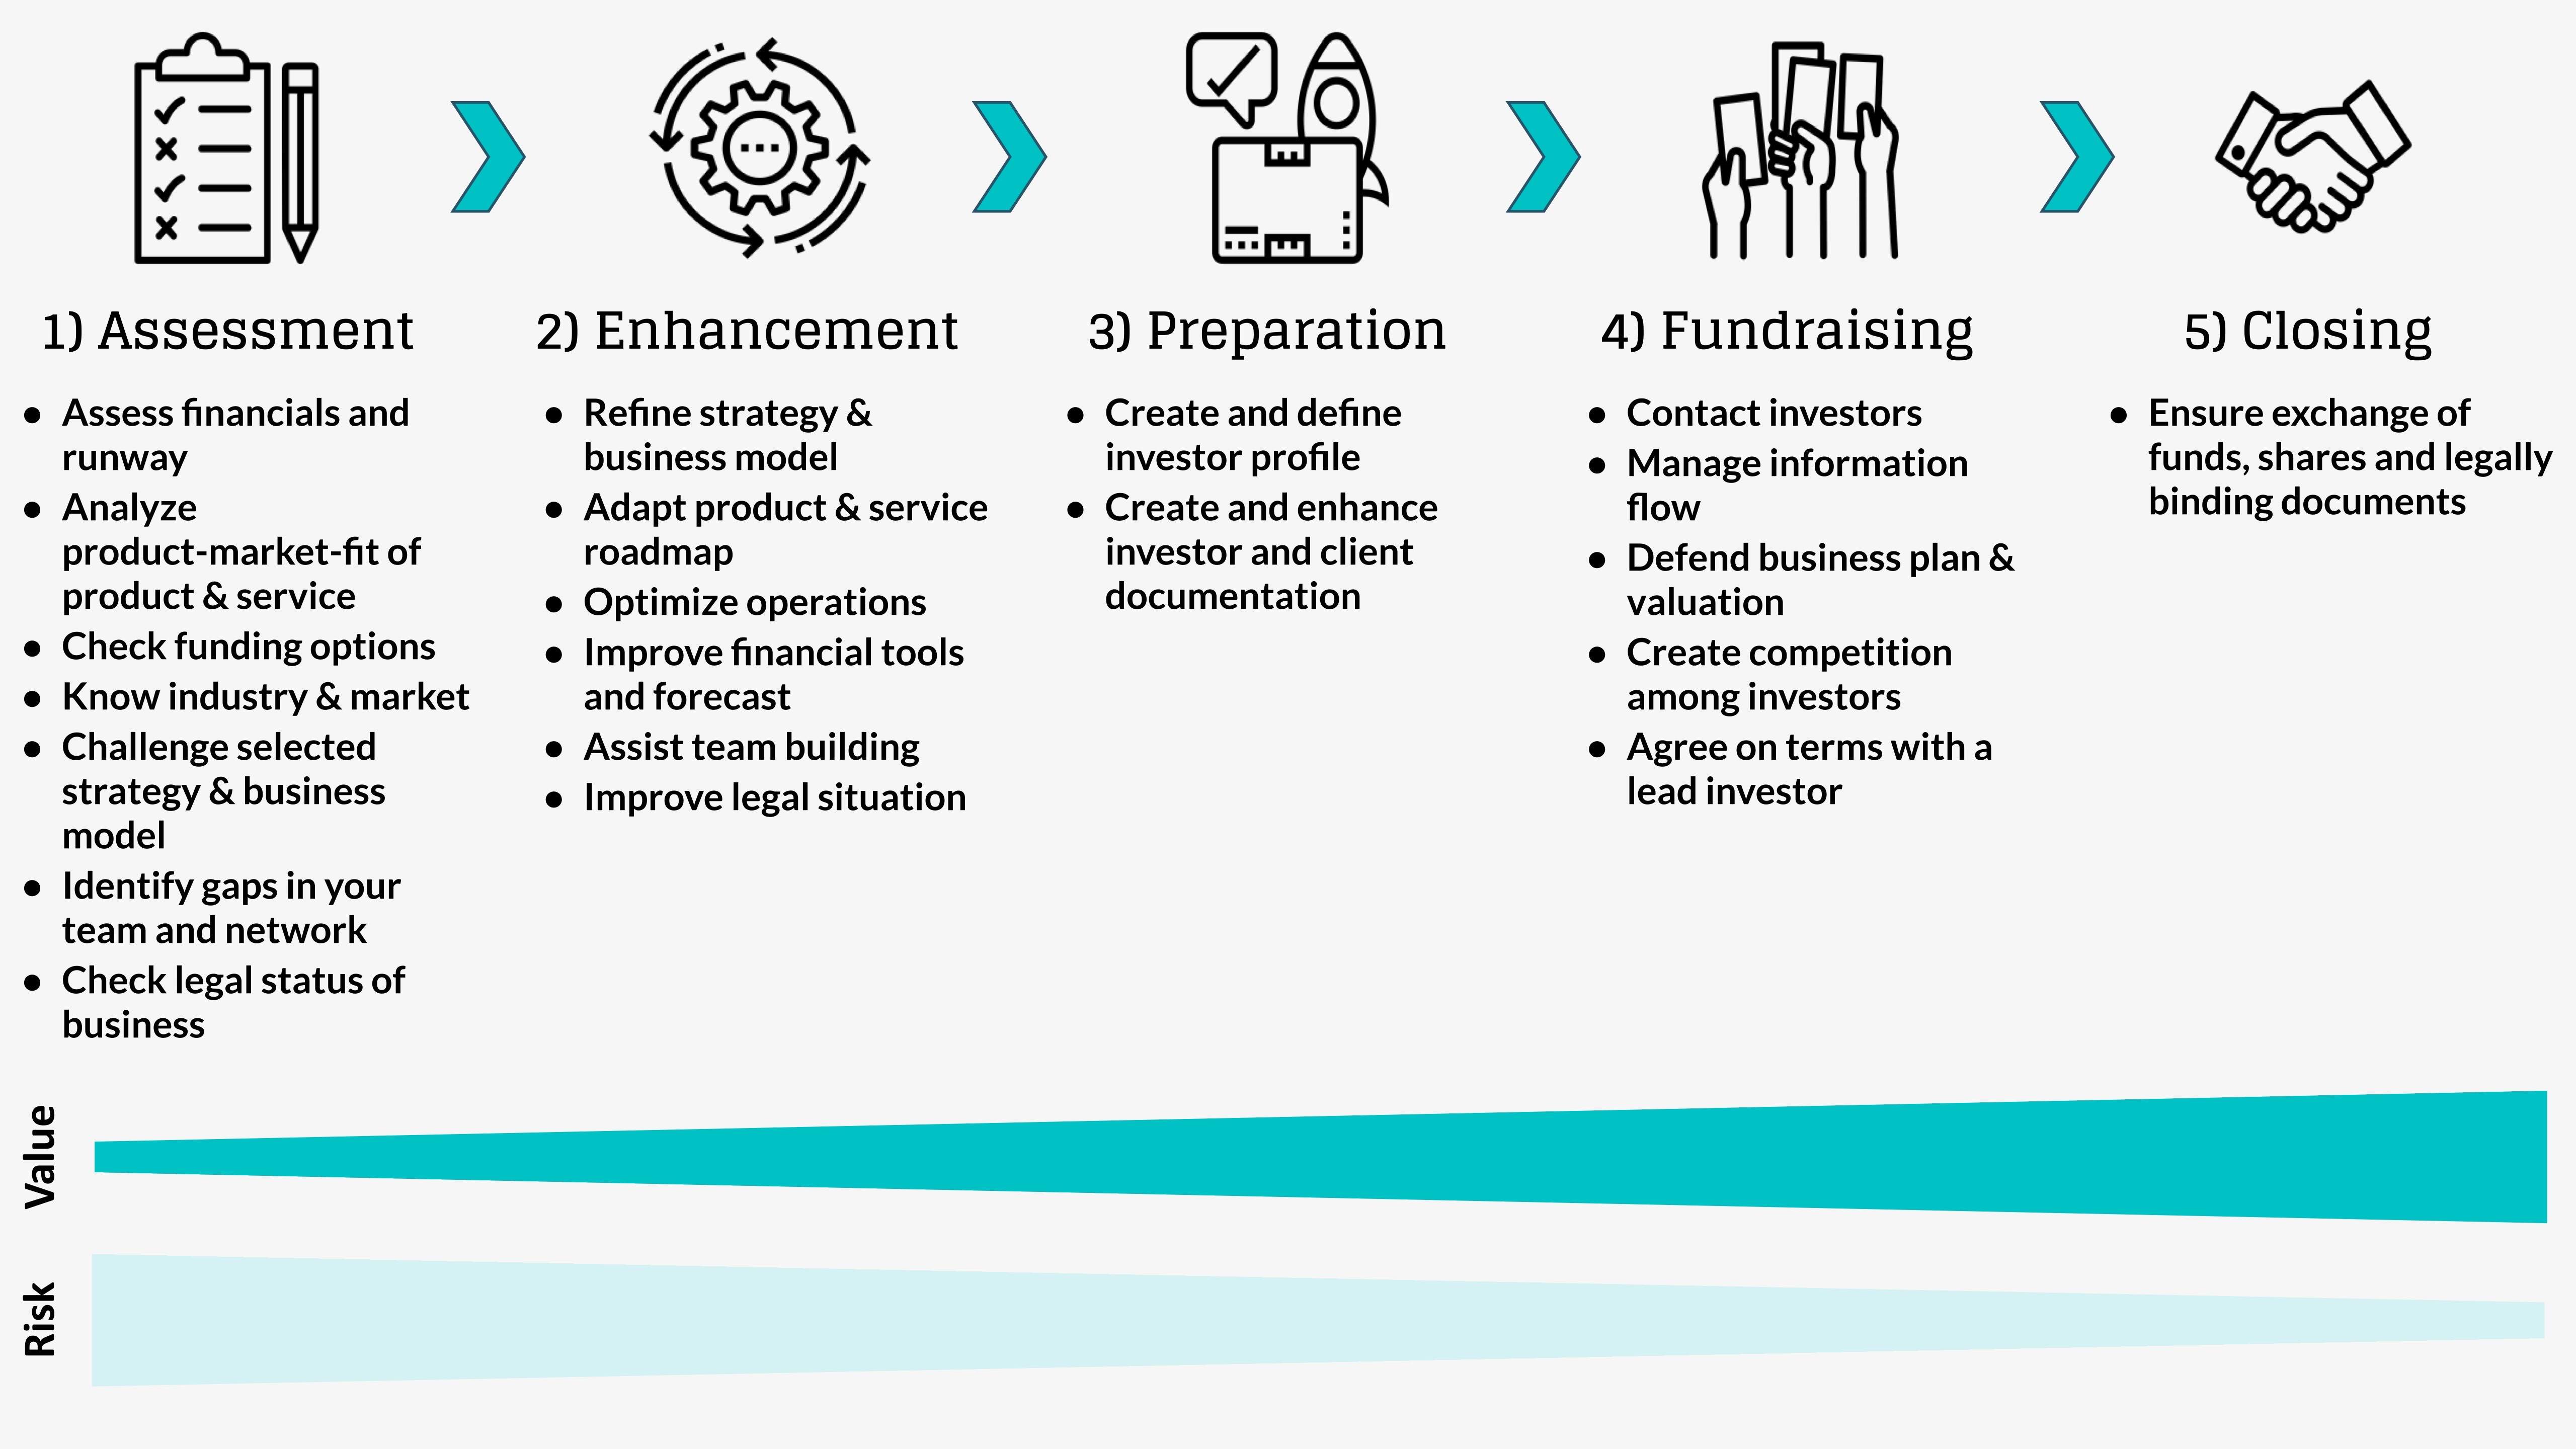 Recieve fundraising and grants in five steps